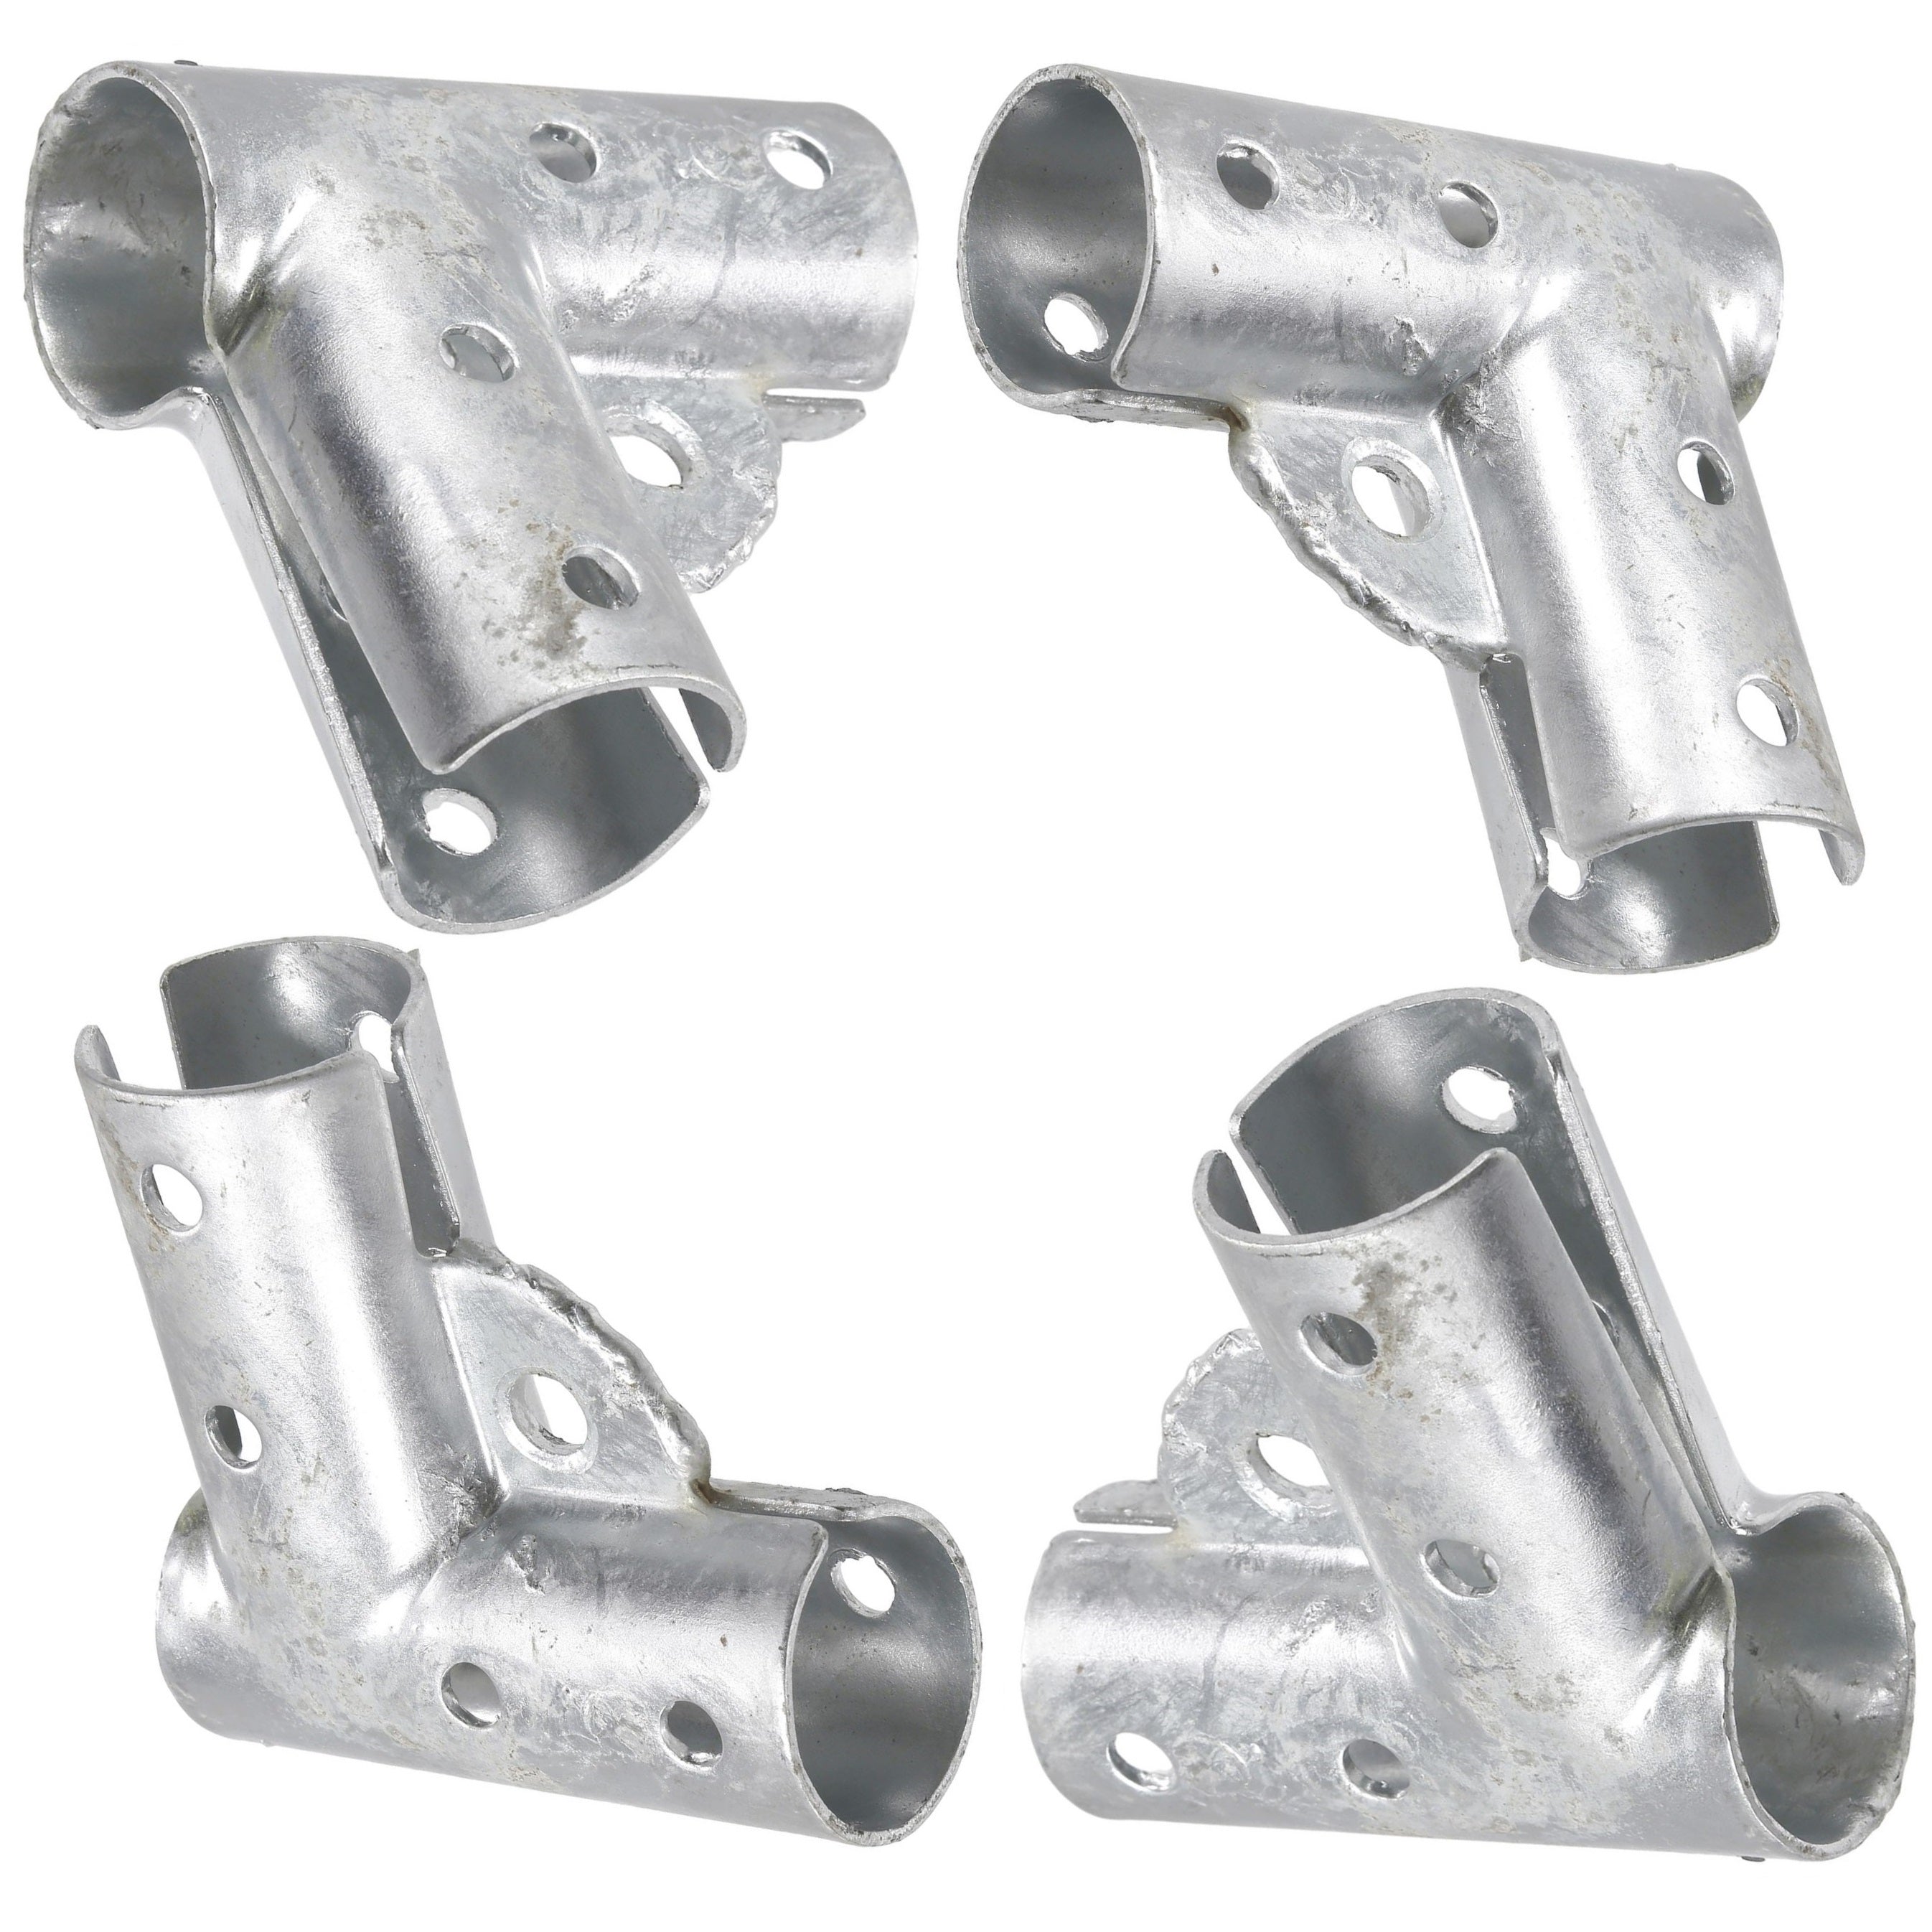 4 Pack Of 1 3/8" Gate Corner Elbows / Tee For Chain Link Fence & Canopy & 1" PVC Pipe